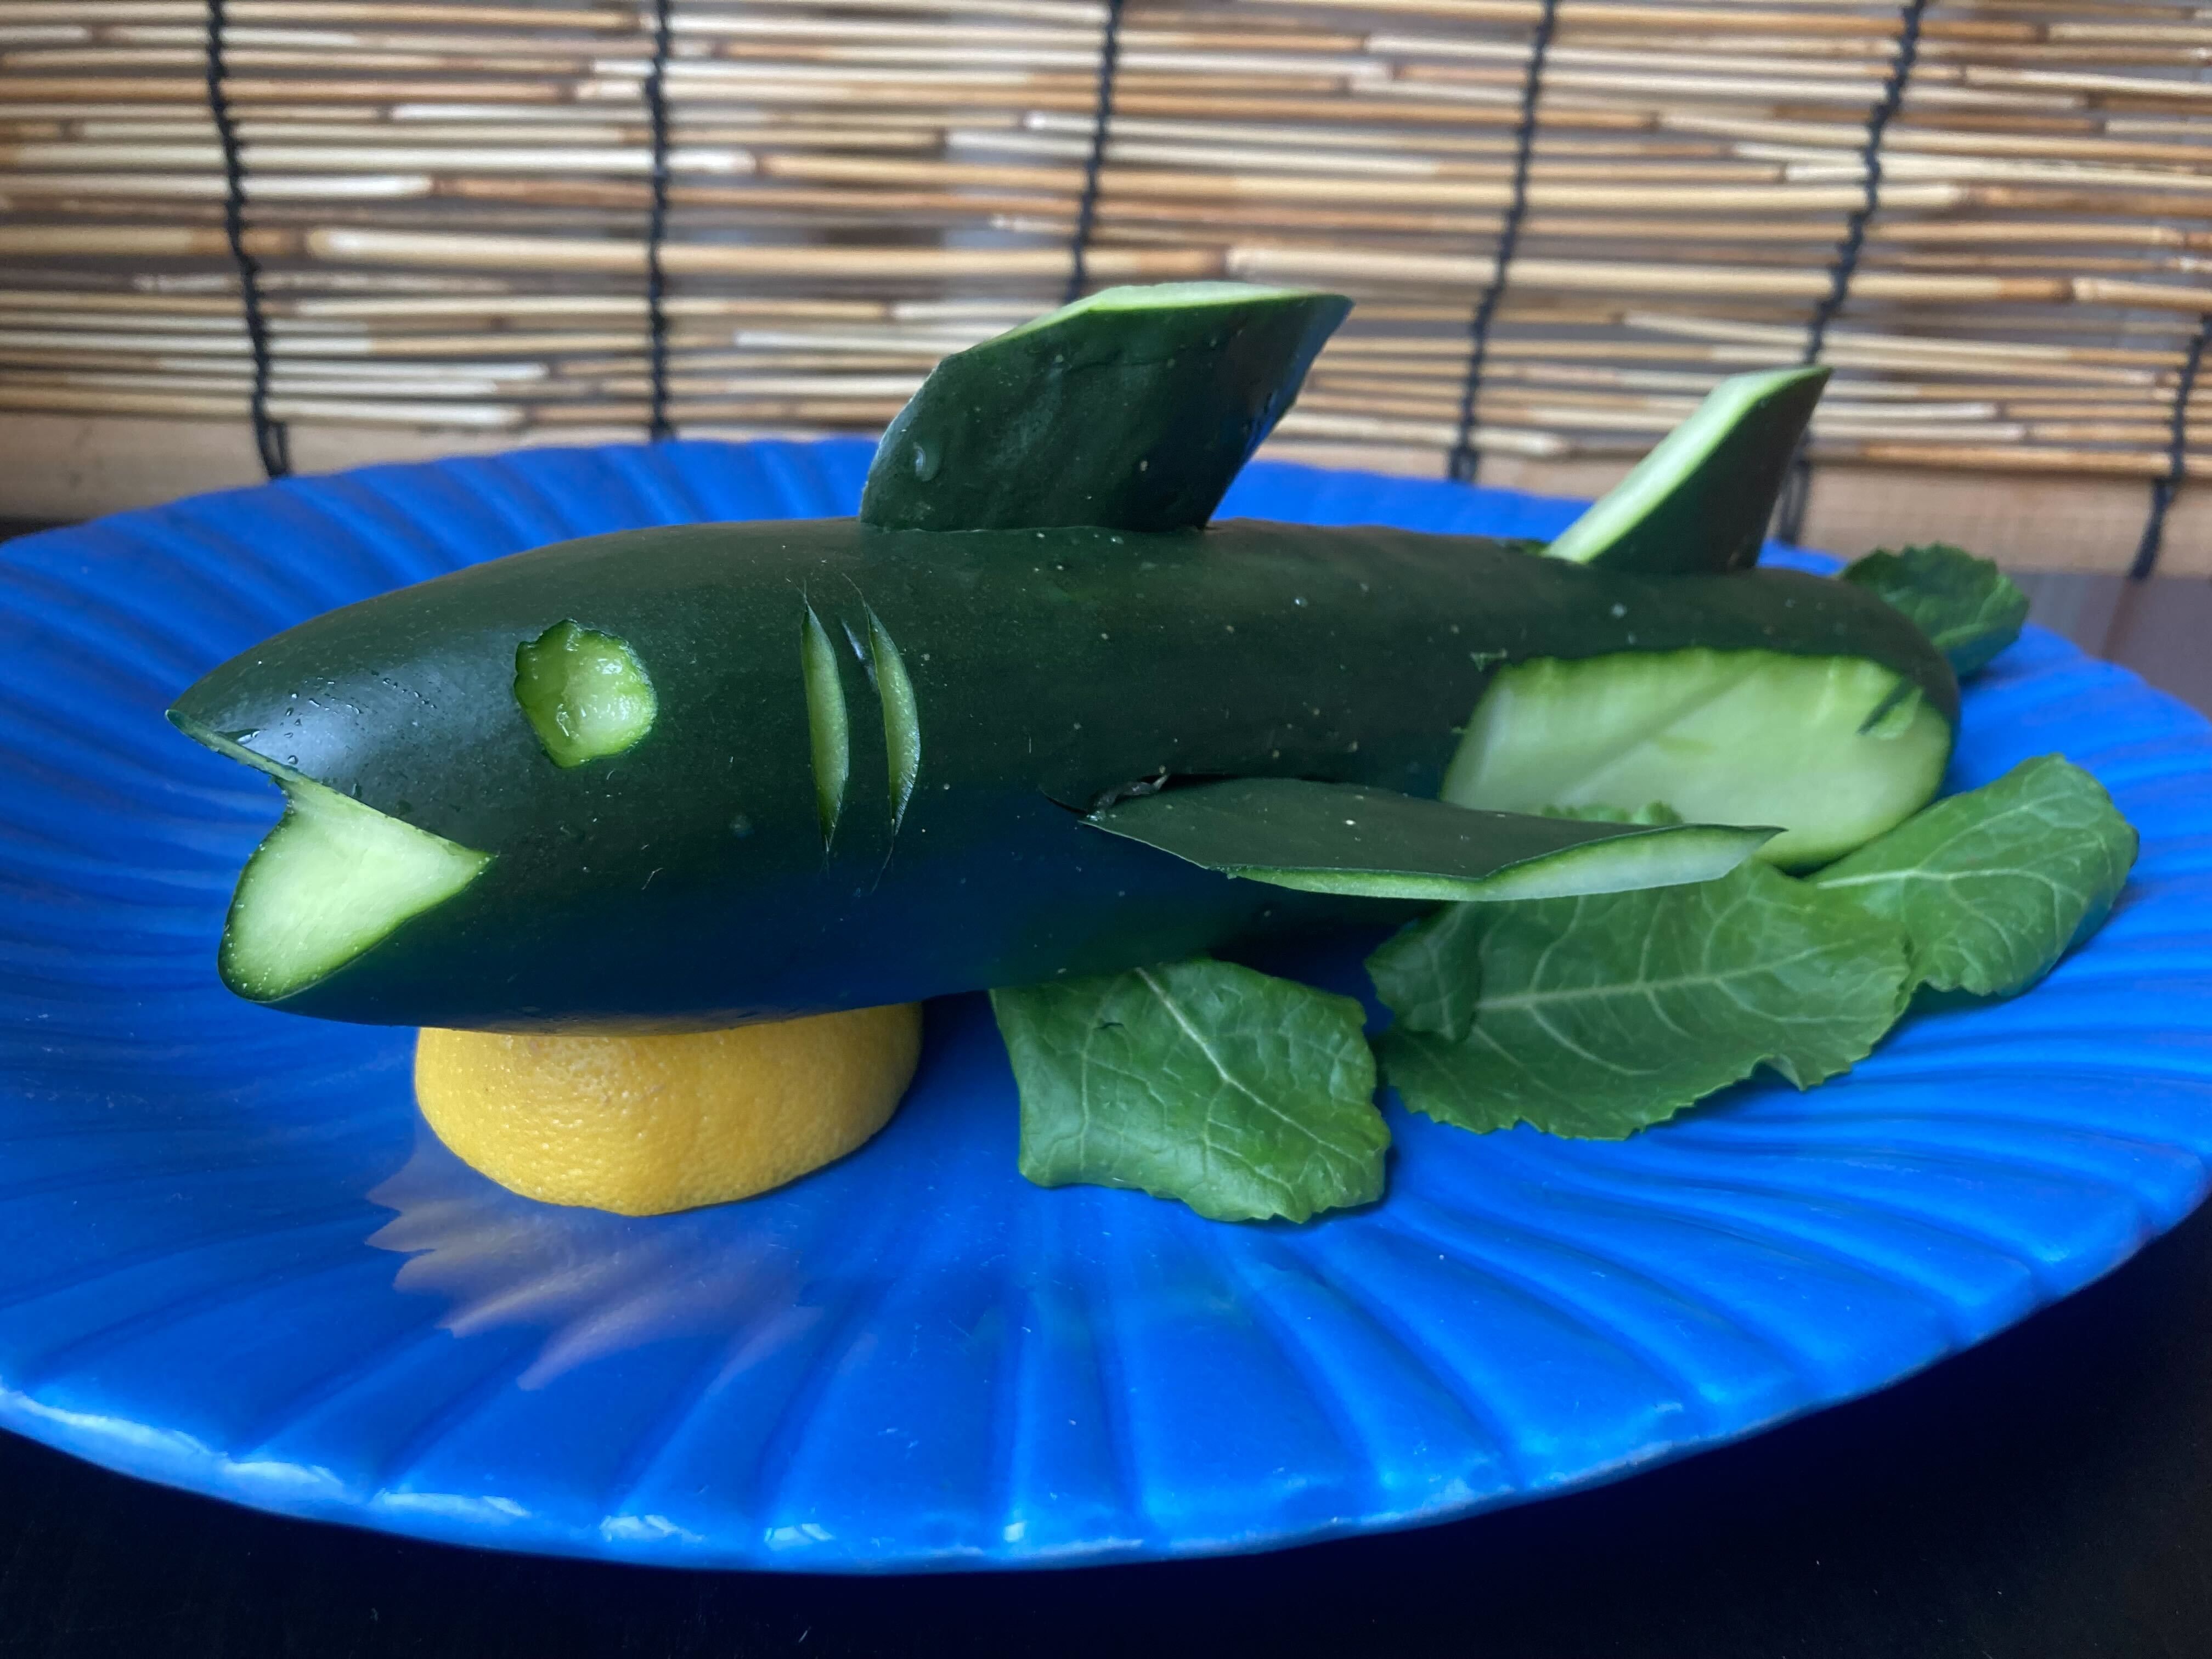 With a small cucumber, you could even make a baby shark.